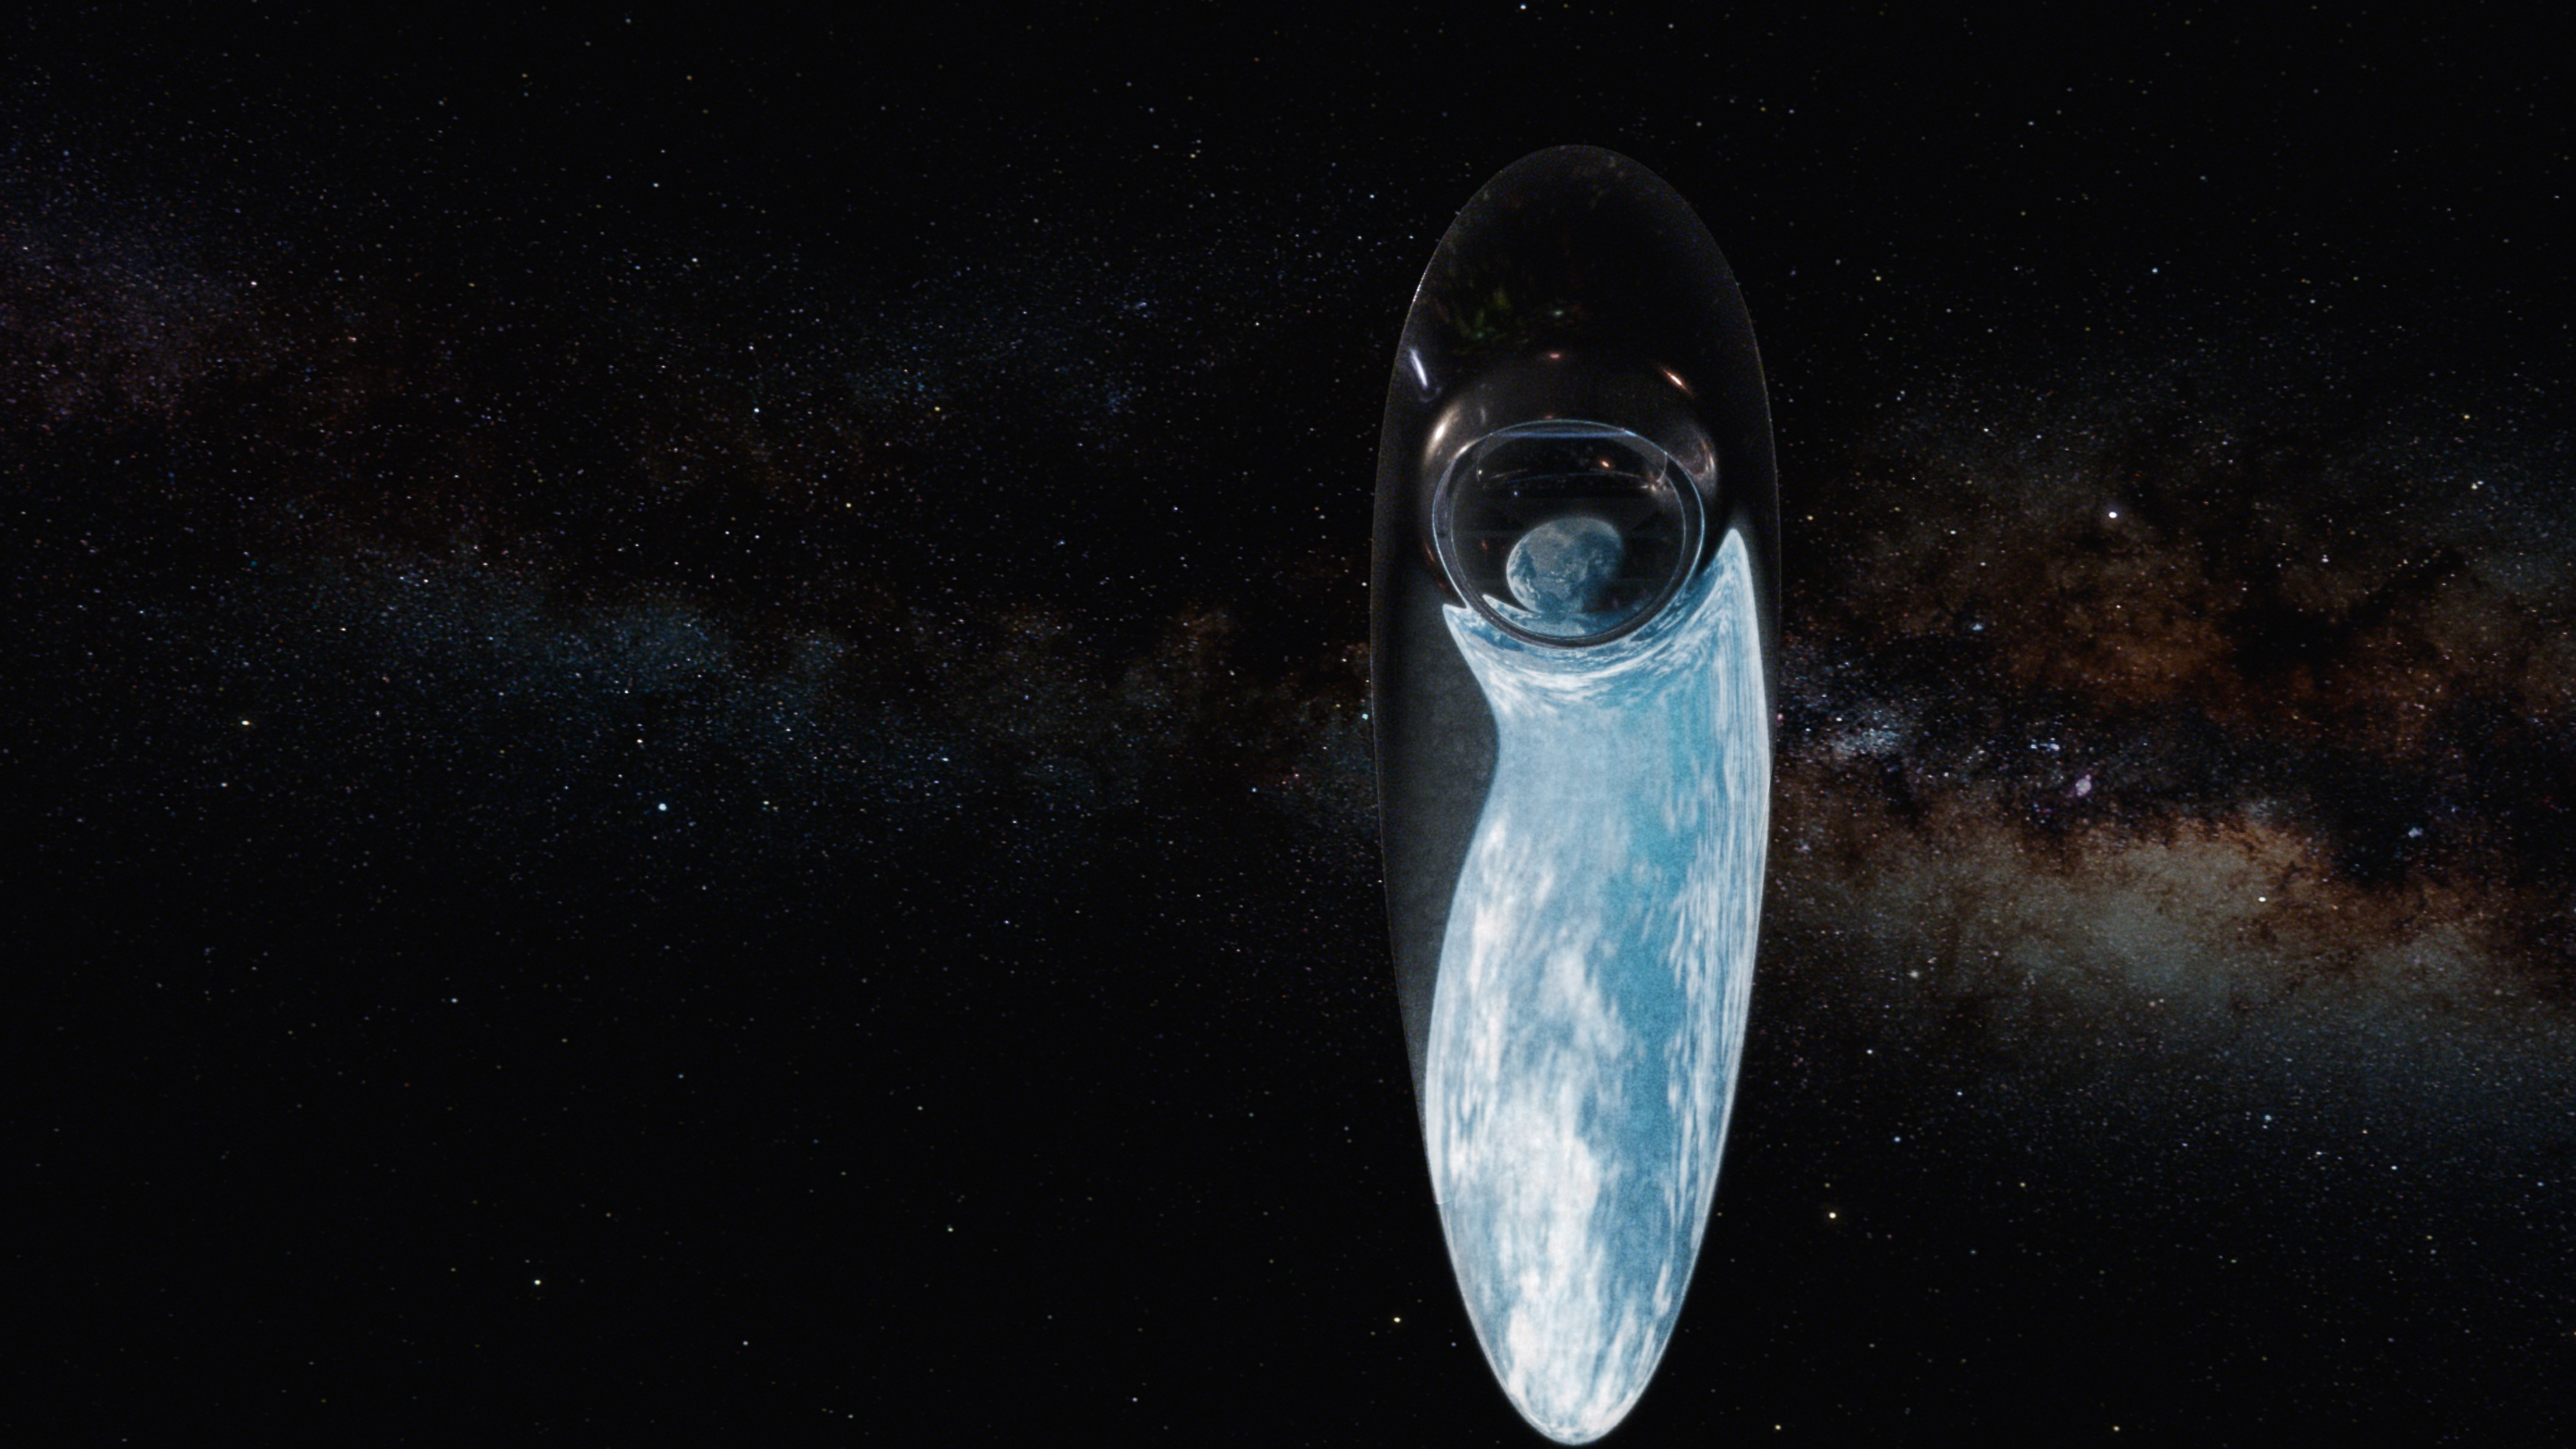 Cosmos: A SpaceTime Odyssey